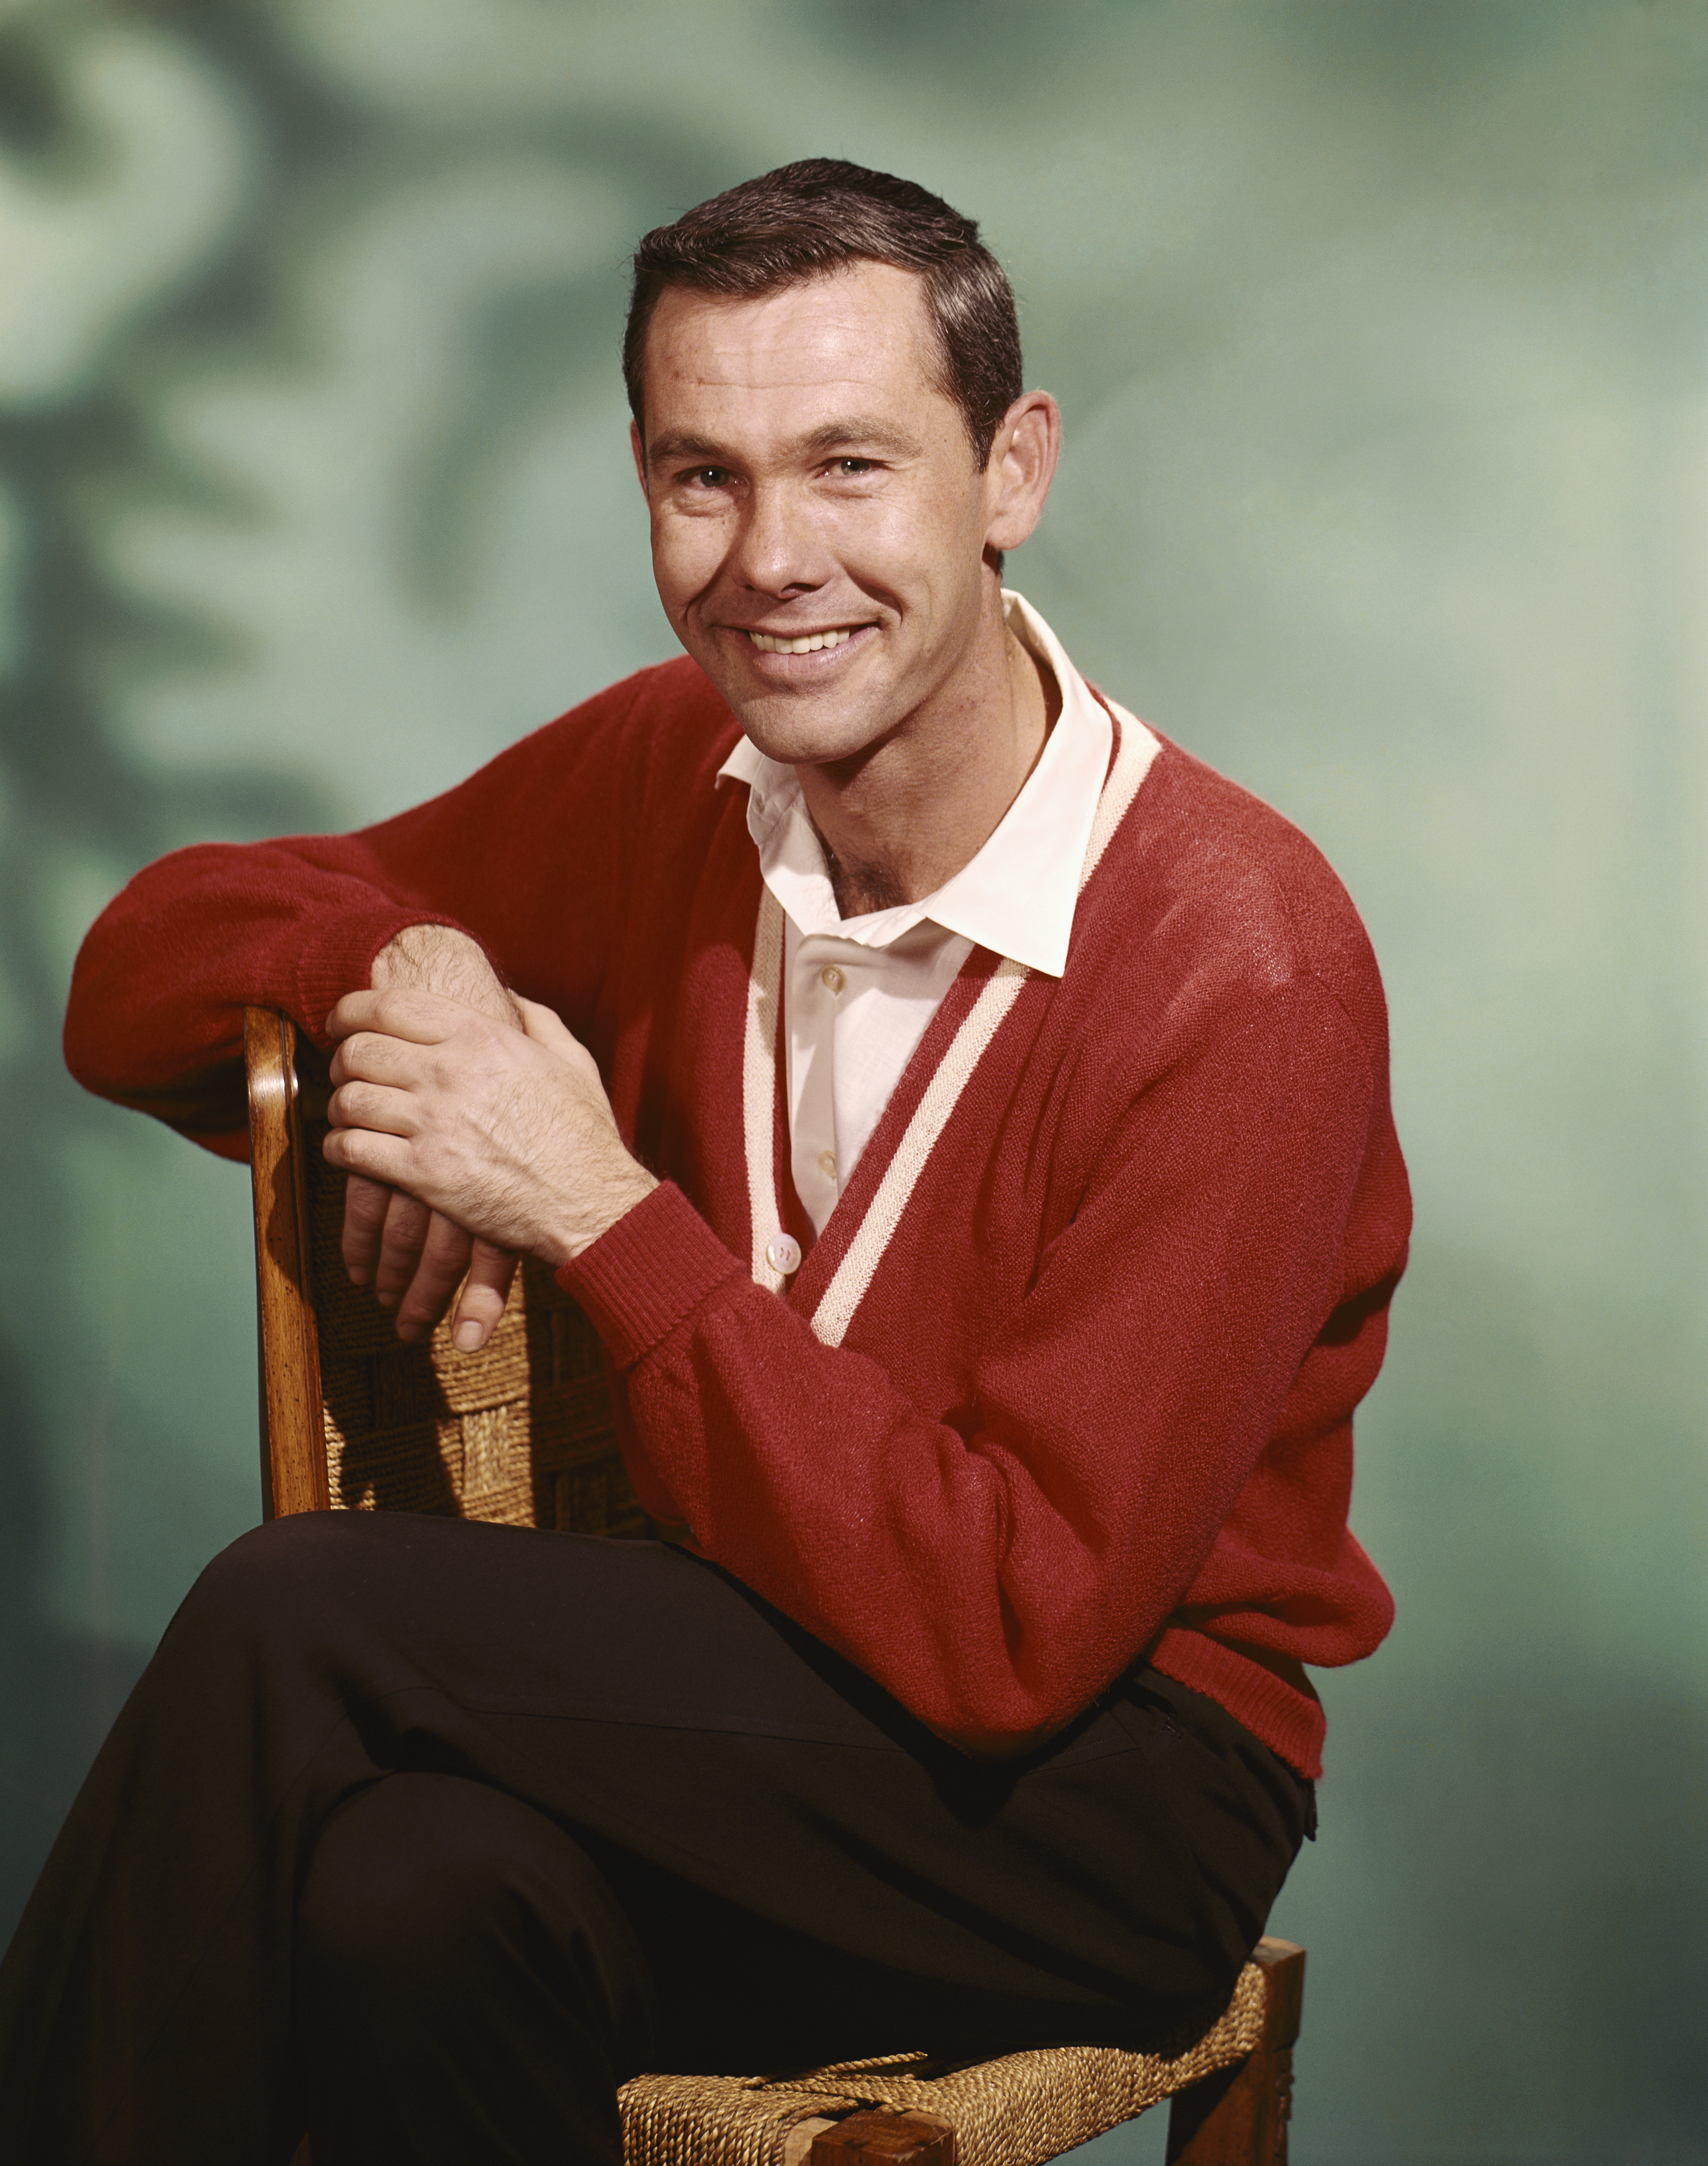 Johnny Carson, circa mid-1950s | Source: Getty Images